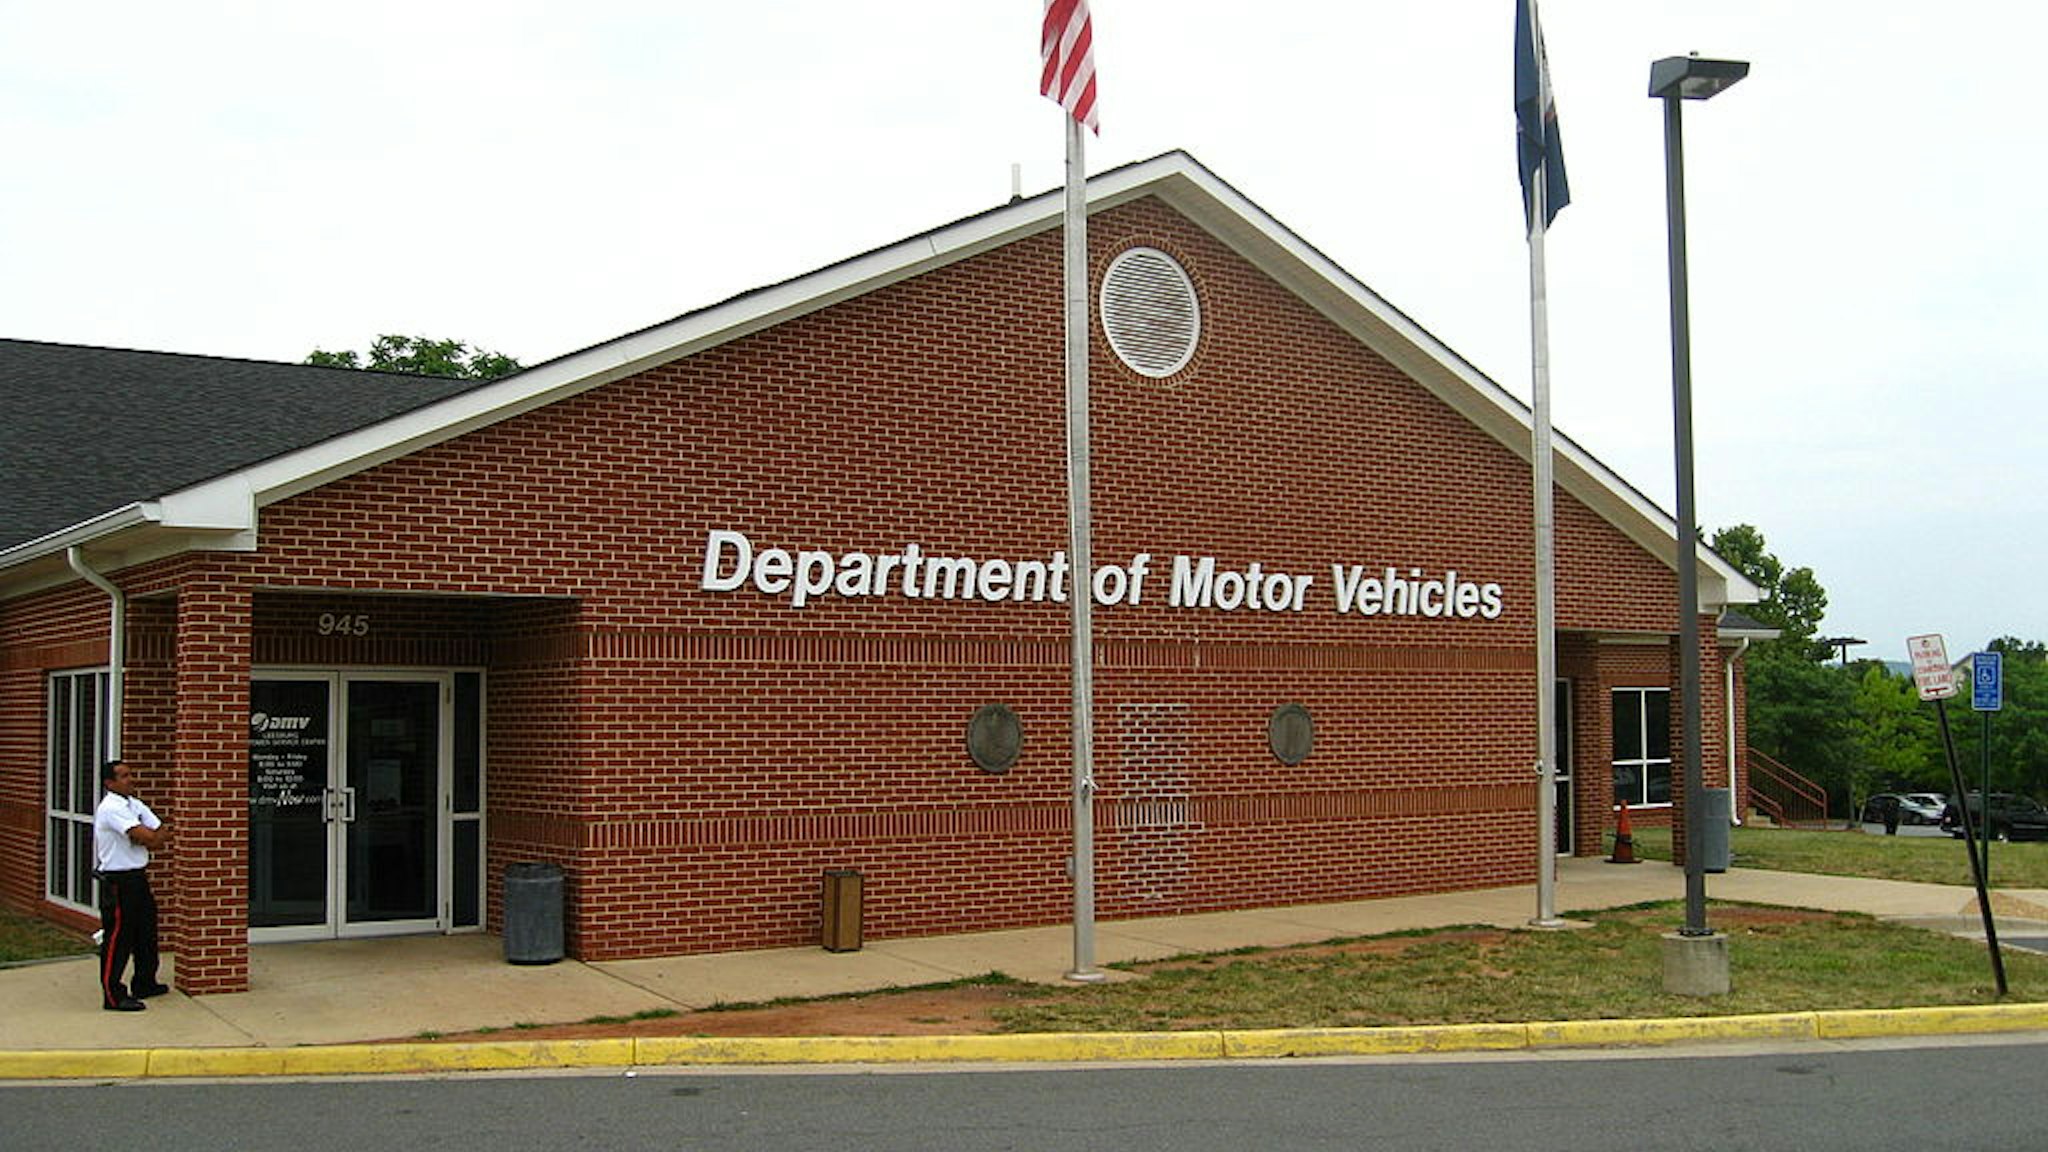 An Ashburn woman ran her silver Honda Civic into the left side of the Virginia Department of Motor Vehicles customer service center in Leesburg today. The car crashed into a stalk room. No one was injured. (Kafia Hosh/The Washington Post via Getty Images)